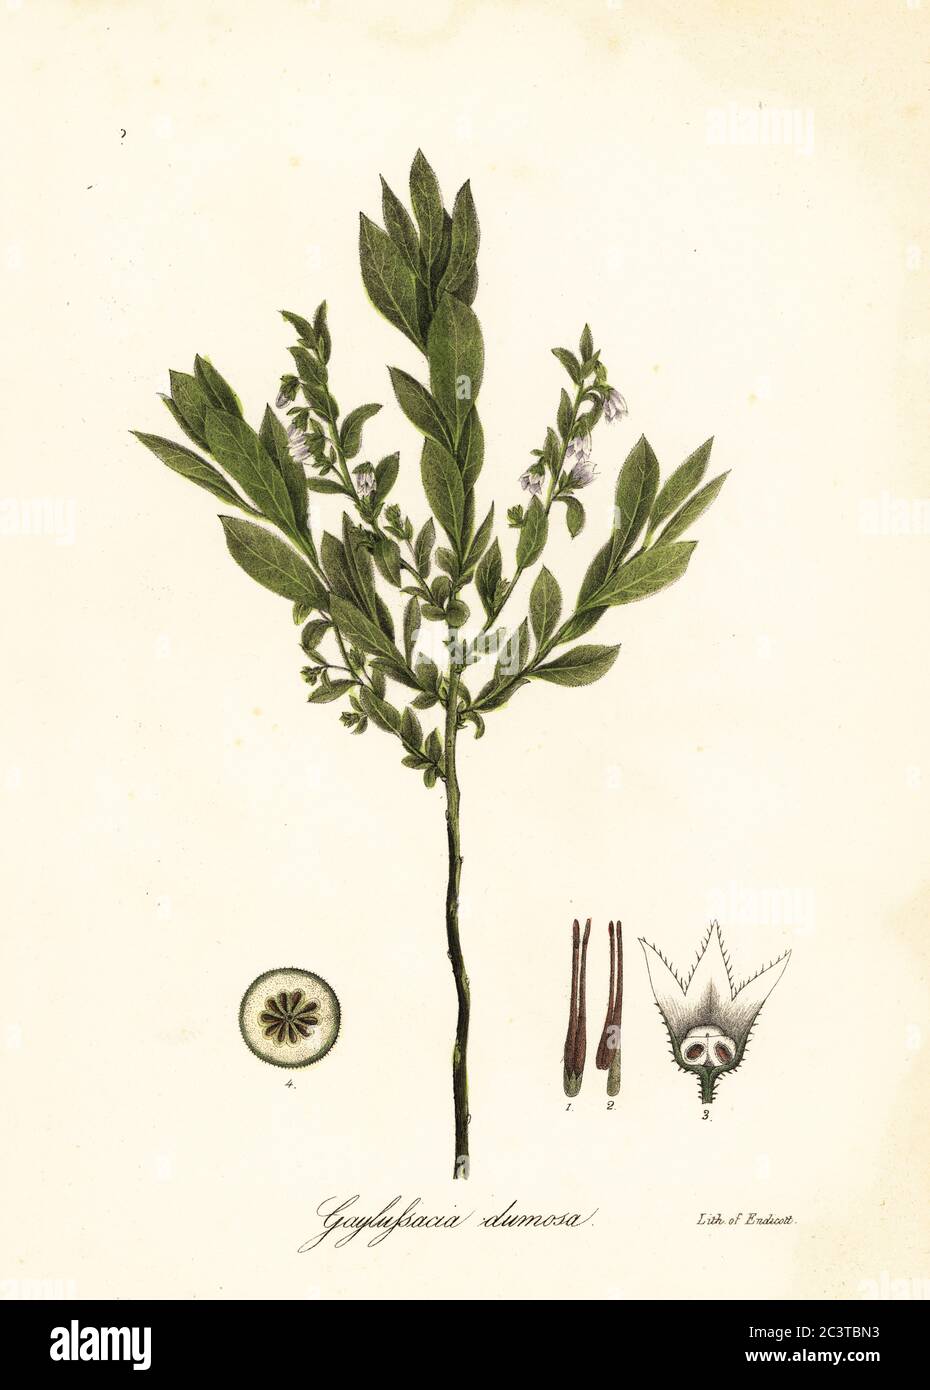 Dwarf huckleberry, bush huckleberry or gopherberry, Gaylussacia dumosa. Handcoloured lithograph by Endicott after a botanical illustration from John Torrey’s A Flora of the State of New York, Carroll and Cook, Albany, 1843. The plates drawn by John Torrey, Agnes Mitchell, Elizabeth Paoley and Swinton. John Torrey was an American botanist, chemist and physician 1796-1873. Stock Photo